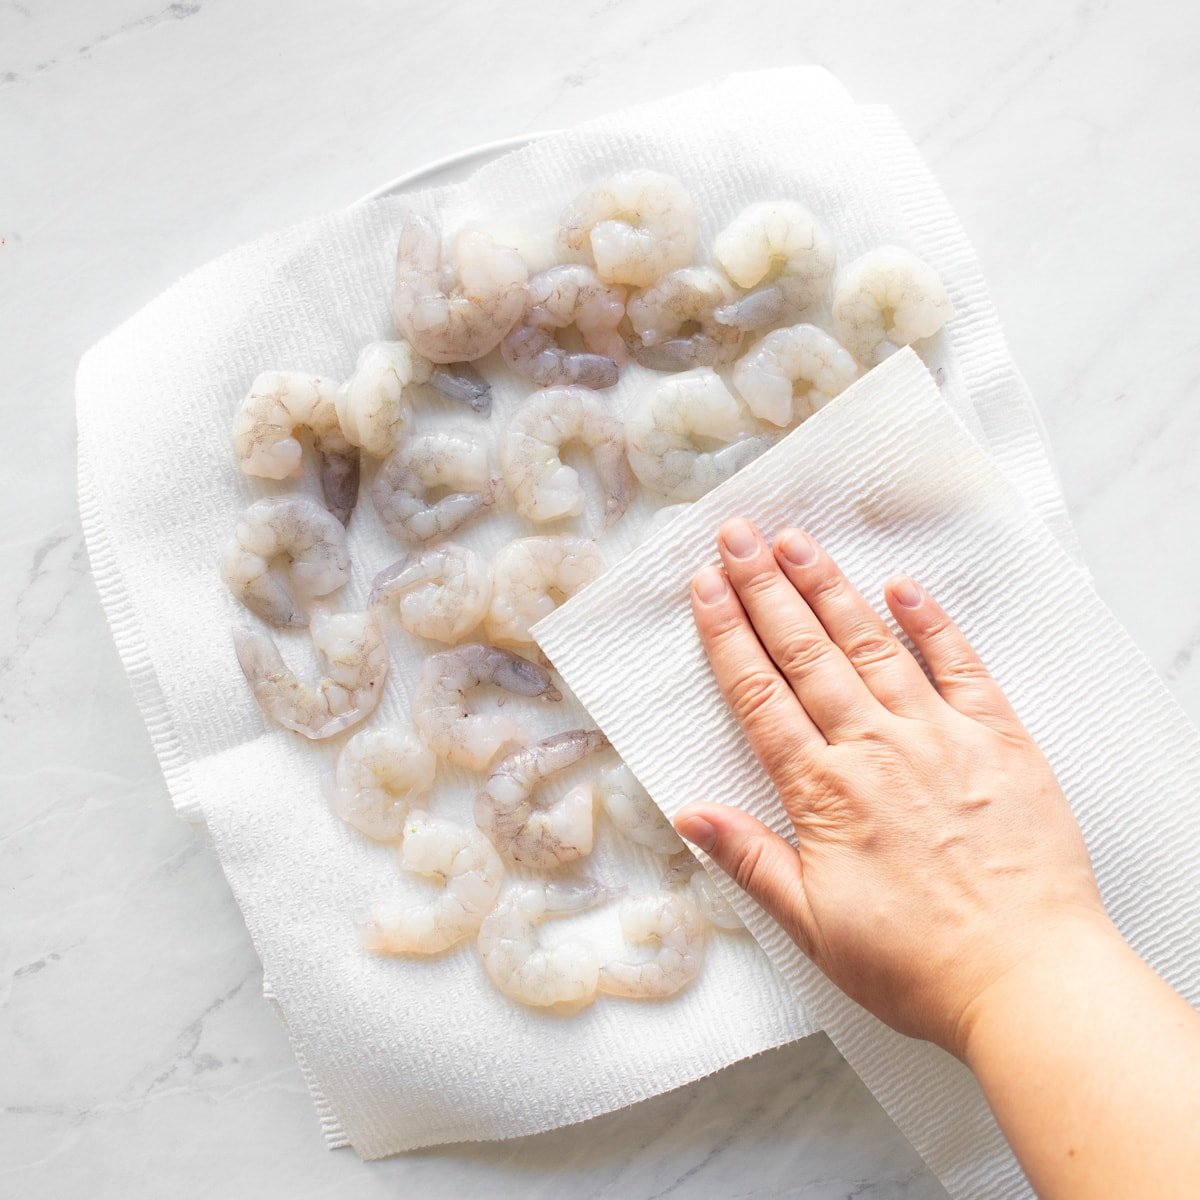 Patting shrimp dry with a paper towel.